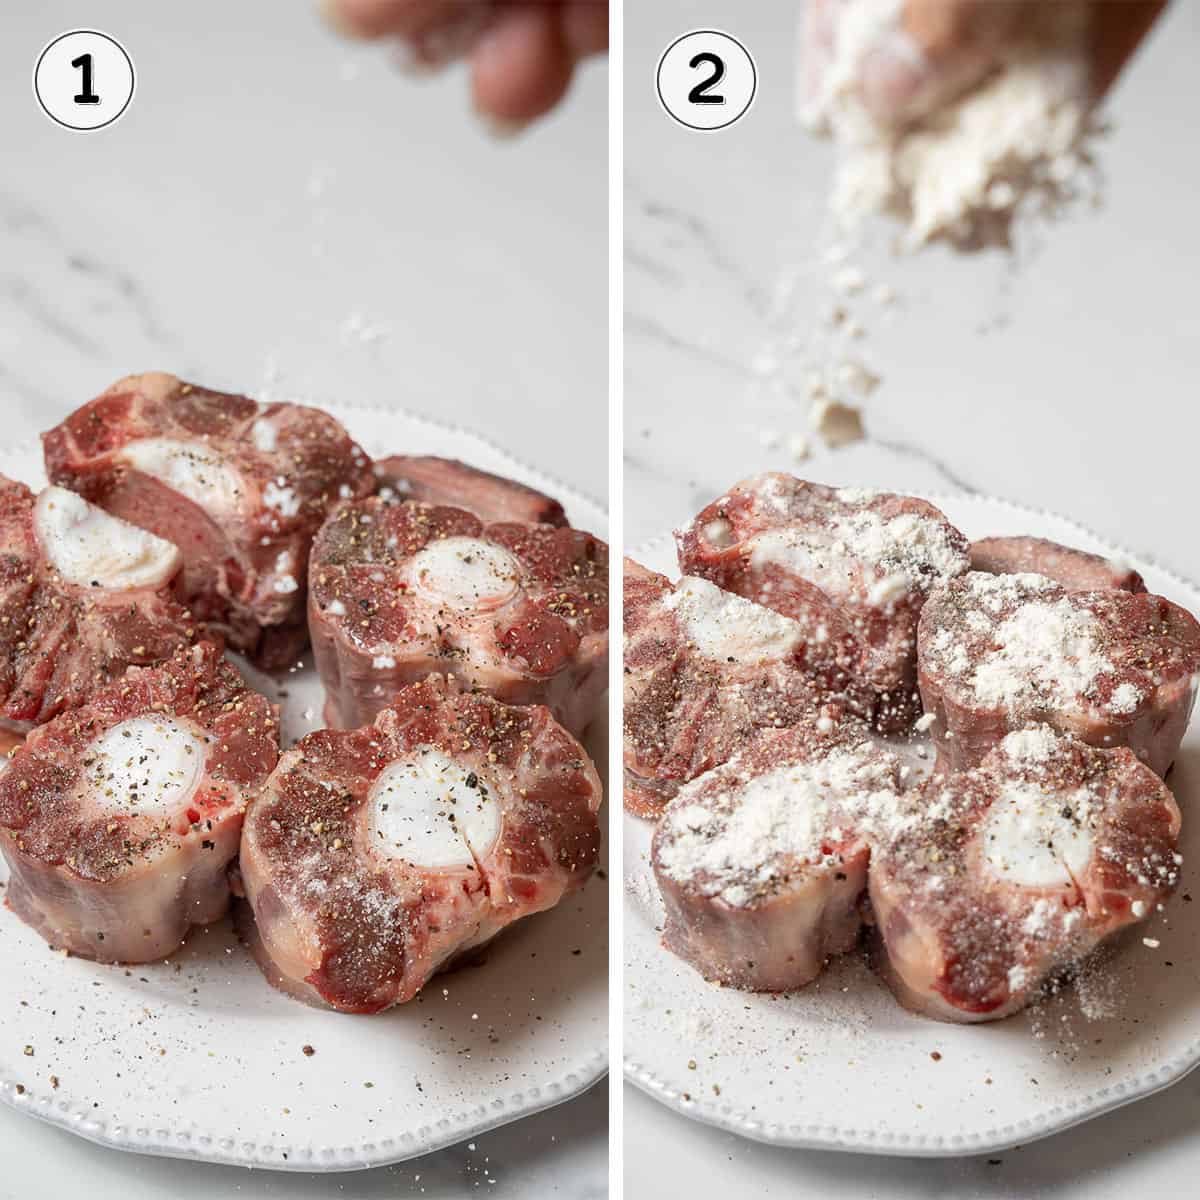 seasoning the oxtails with salt and pepper and coating in flour.